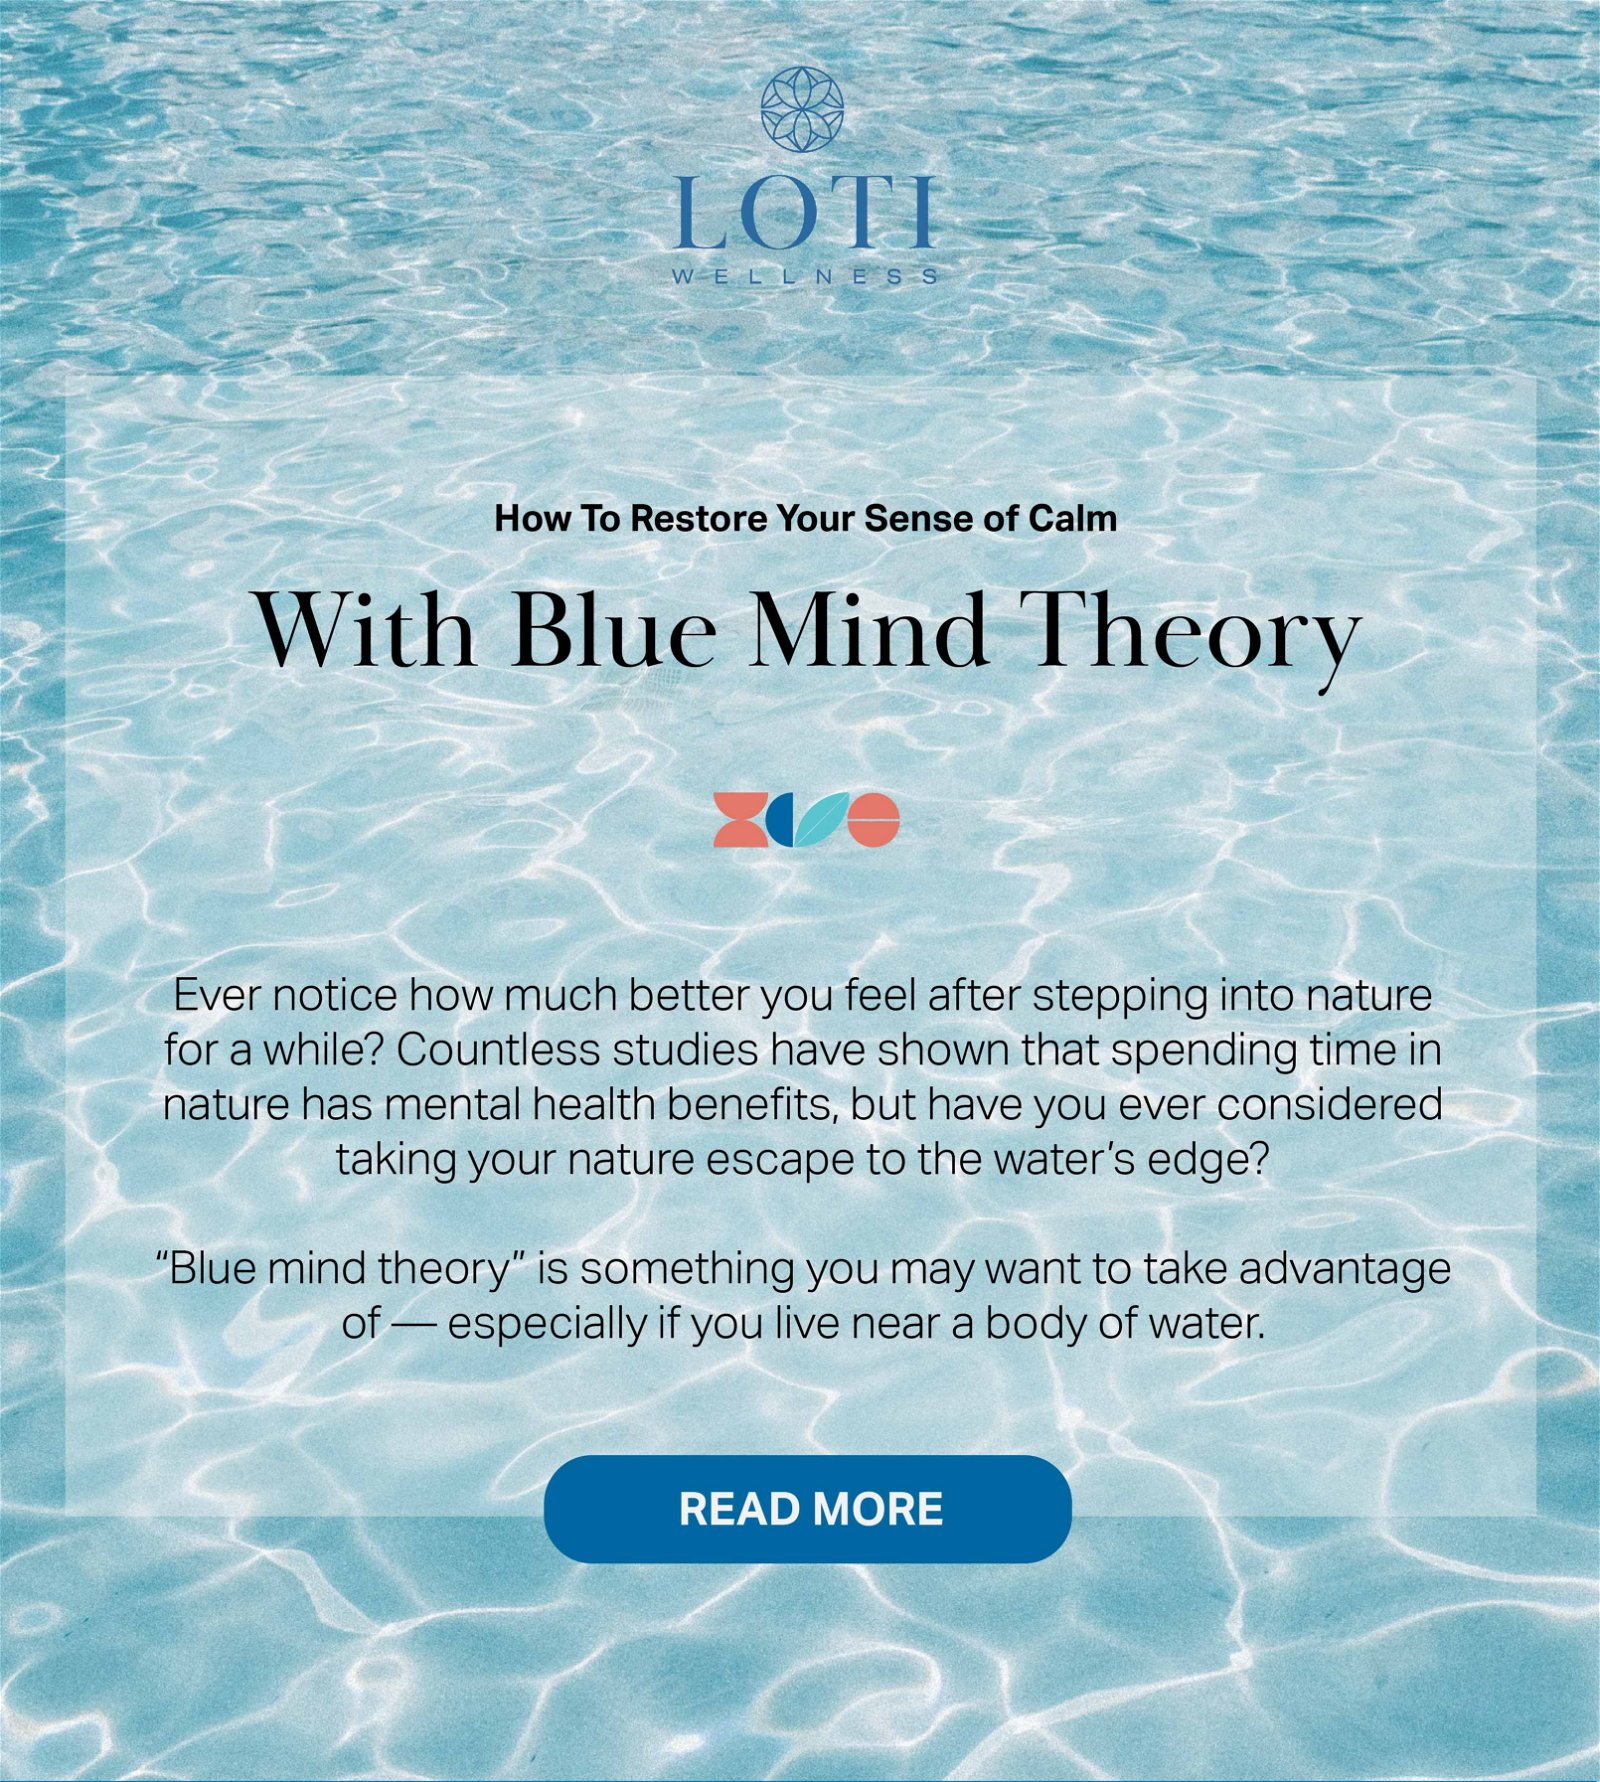 What is Blue Mind Theory?